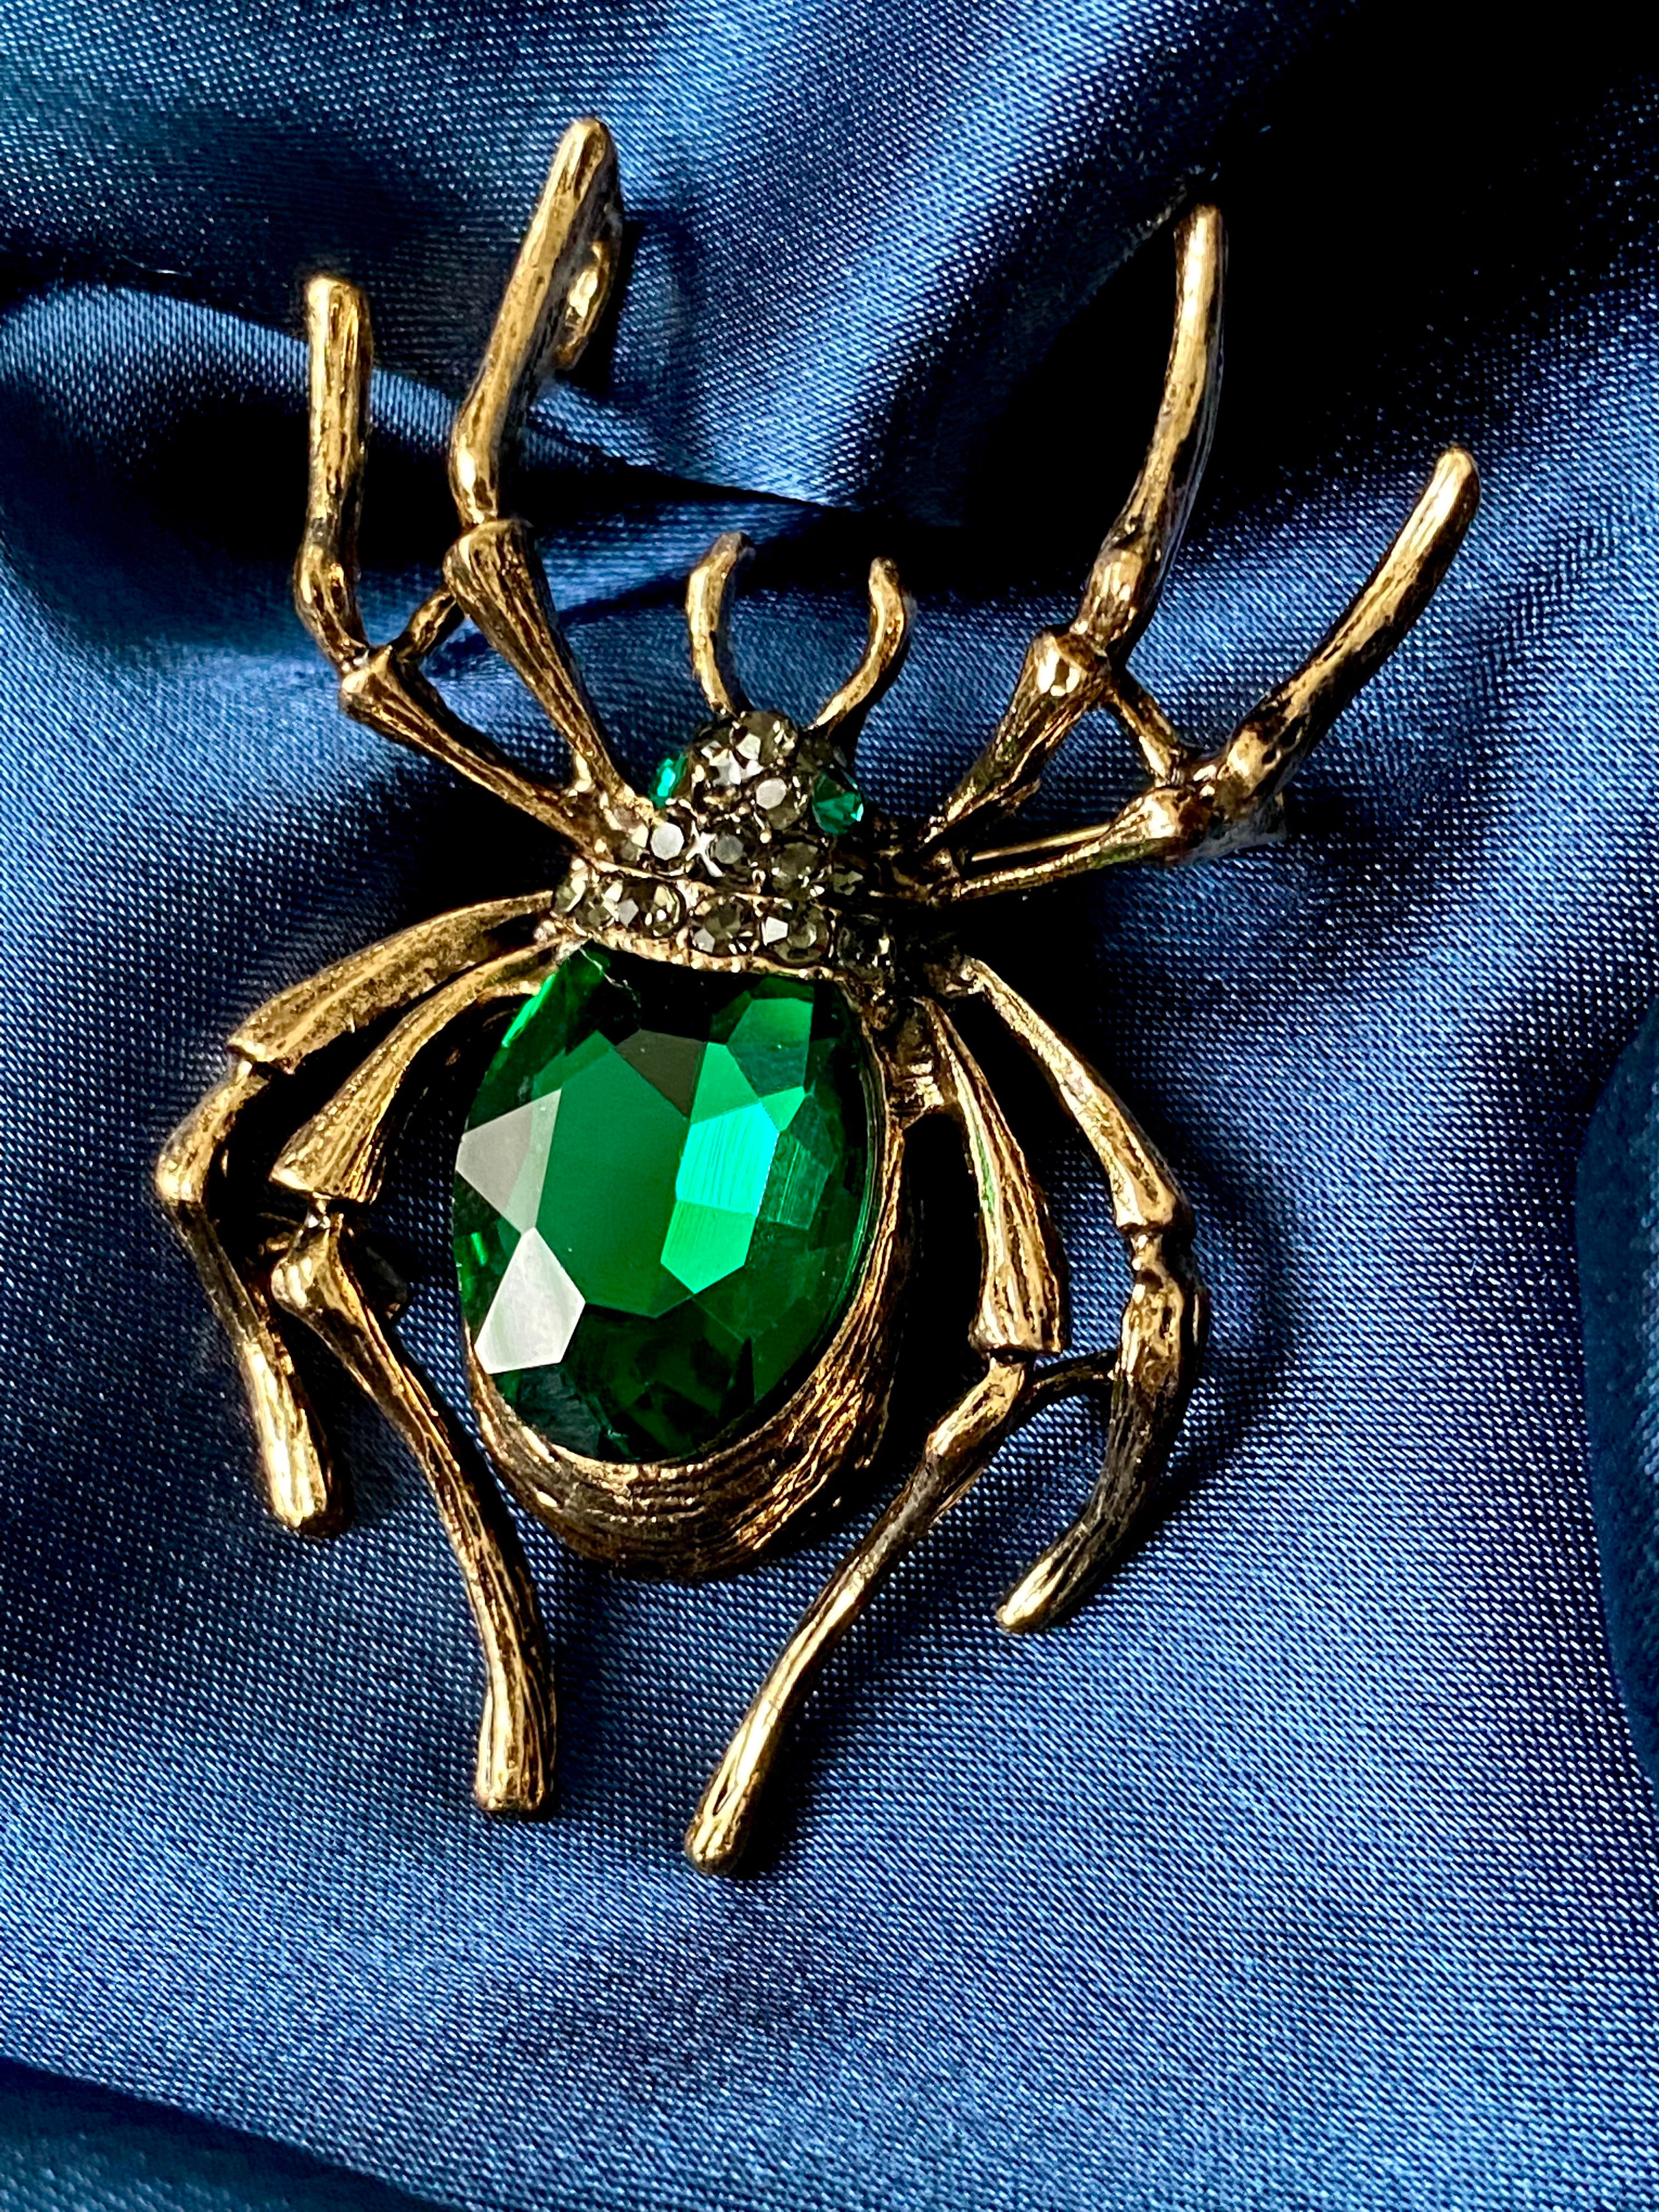 Vintage Large Rhinestone Spider Brooch Pin with Green Eyes